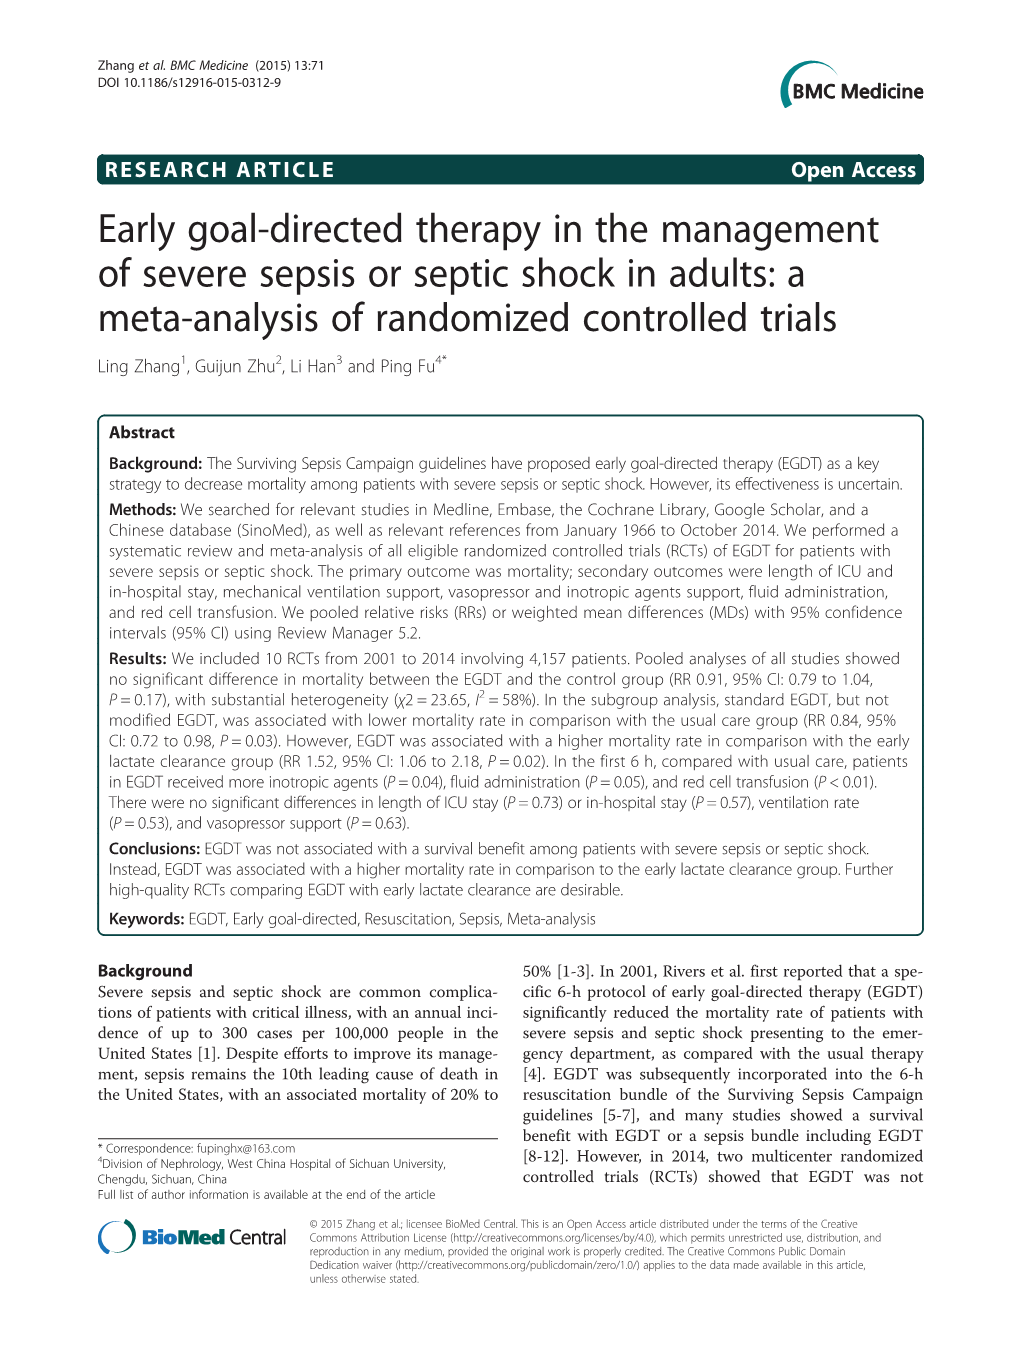 Early Goal-Directed Therapy in the Management of Severe Sepsis Or